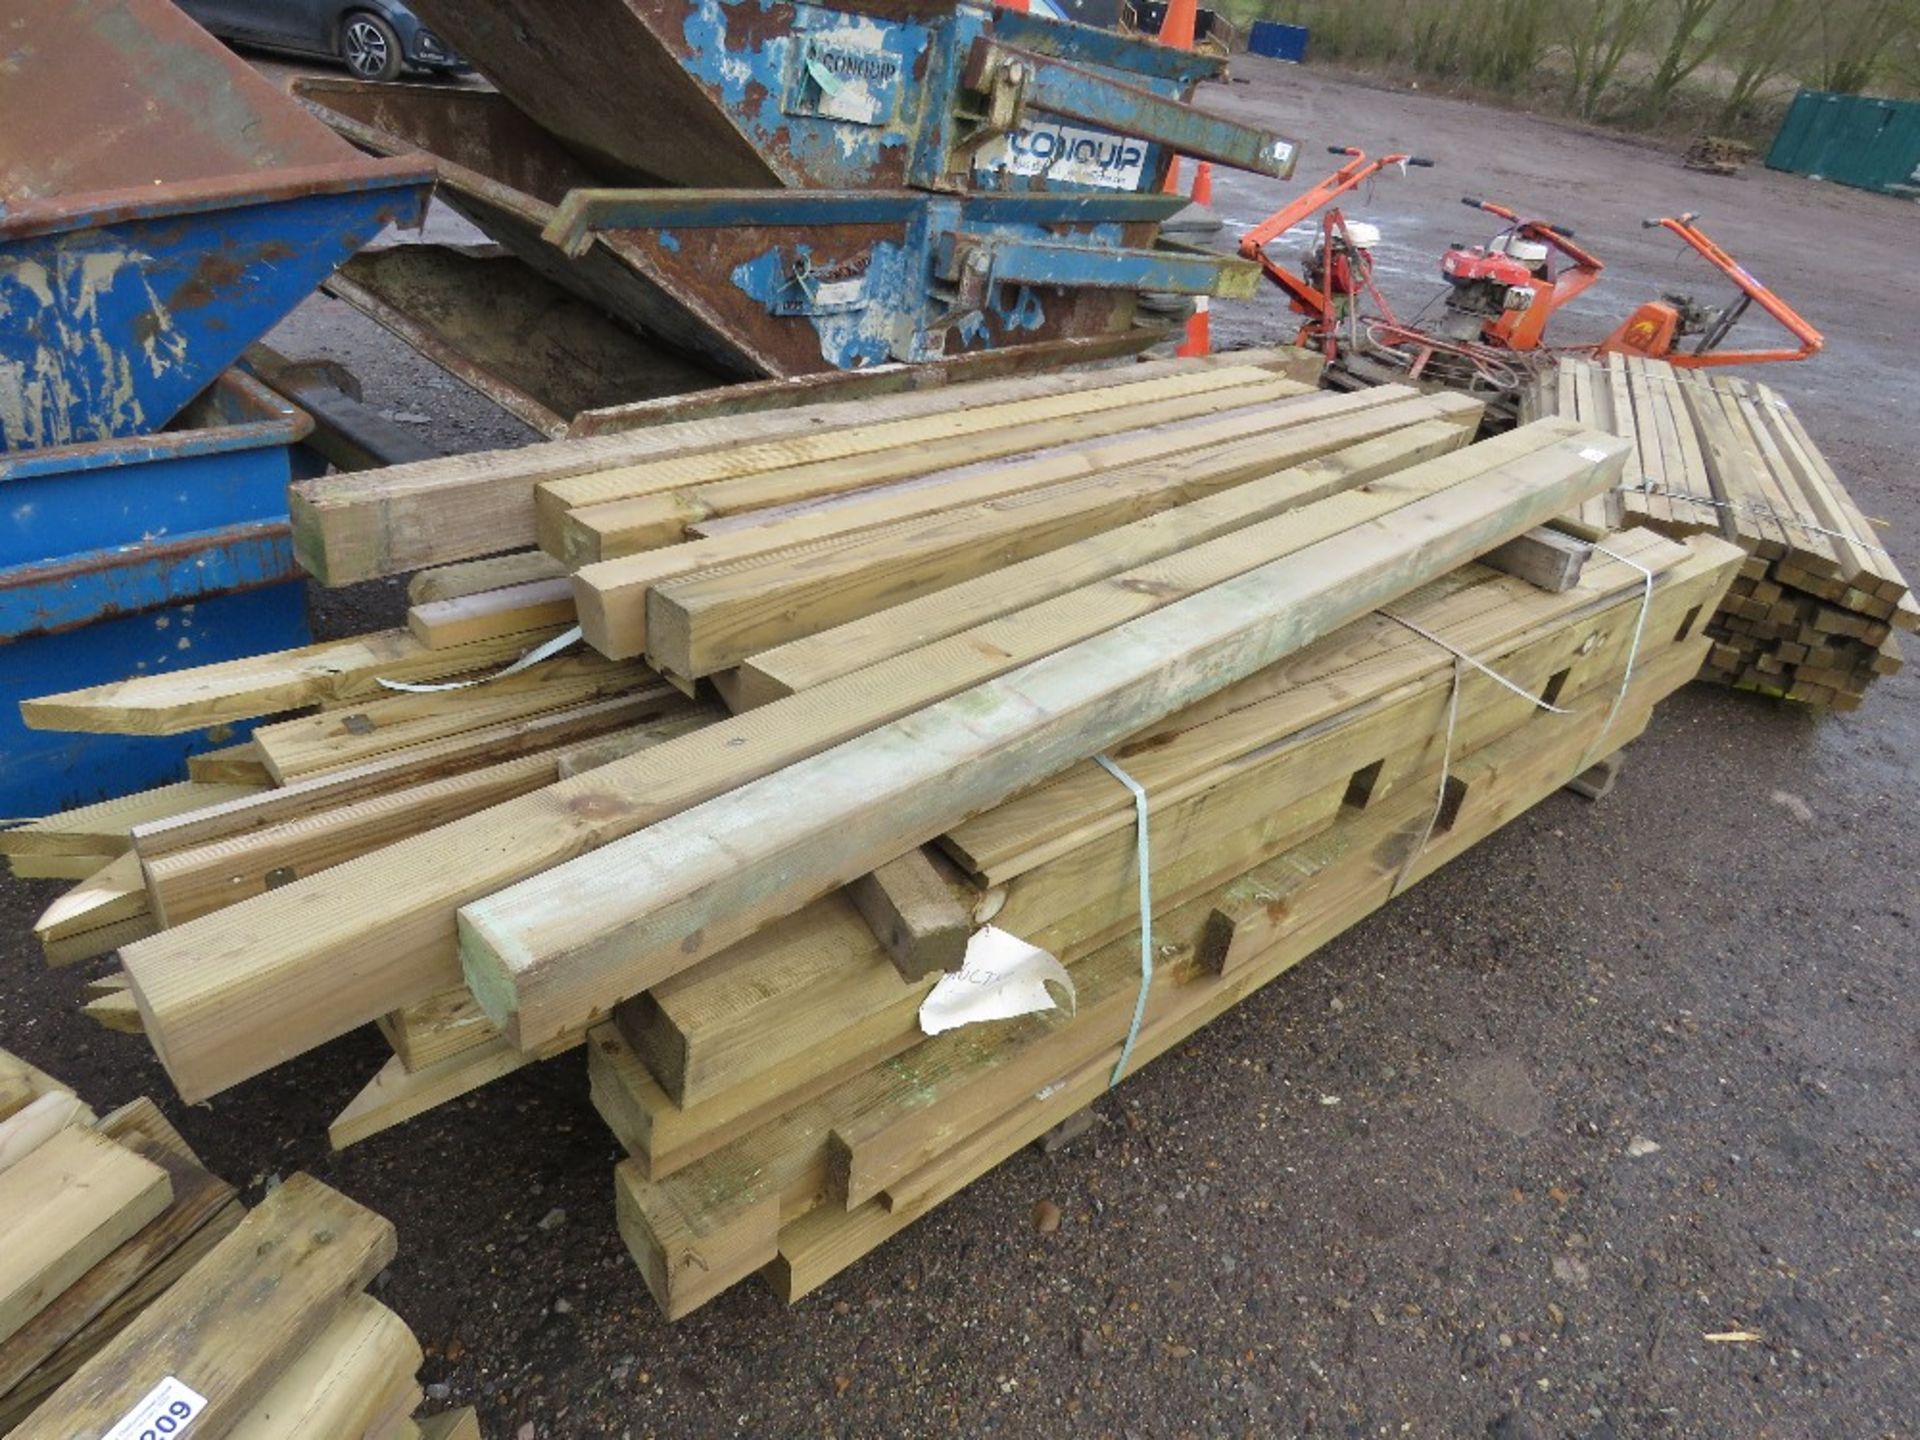 BUNDLE OF HEAVY DUTY TIMBERS AND POSTS 6-9FT LENGTH APPROX. - Image 4 of 4